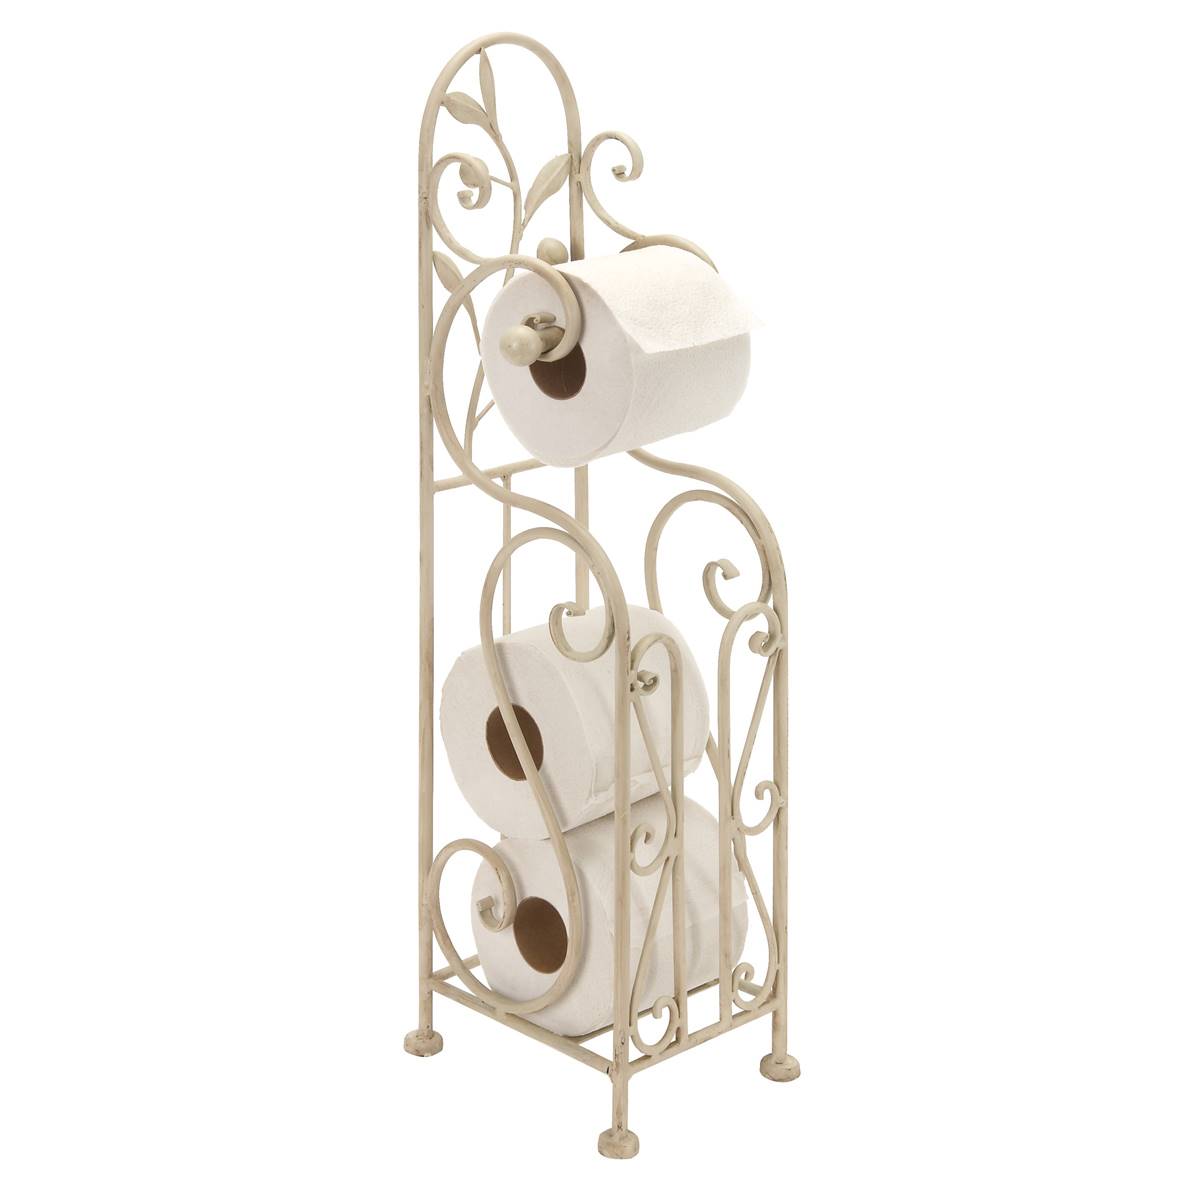 9th & Pike(R) Cream Iron Traditional Toilet Paper Towel Holder